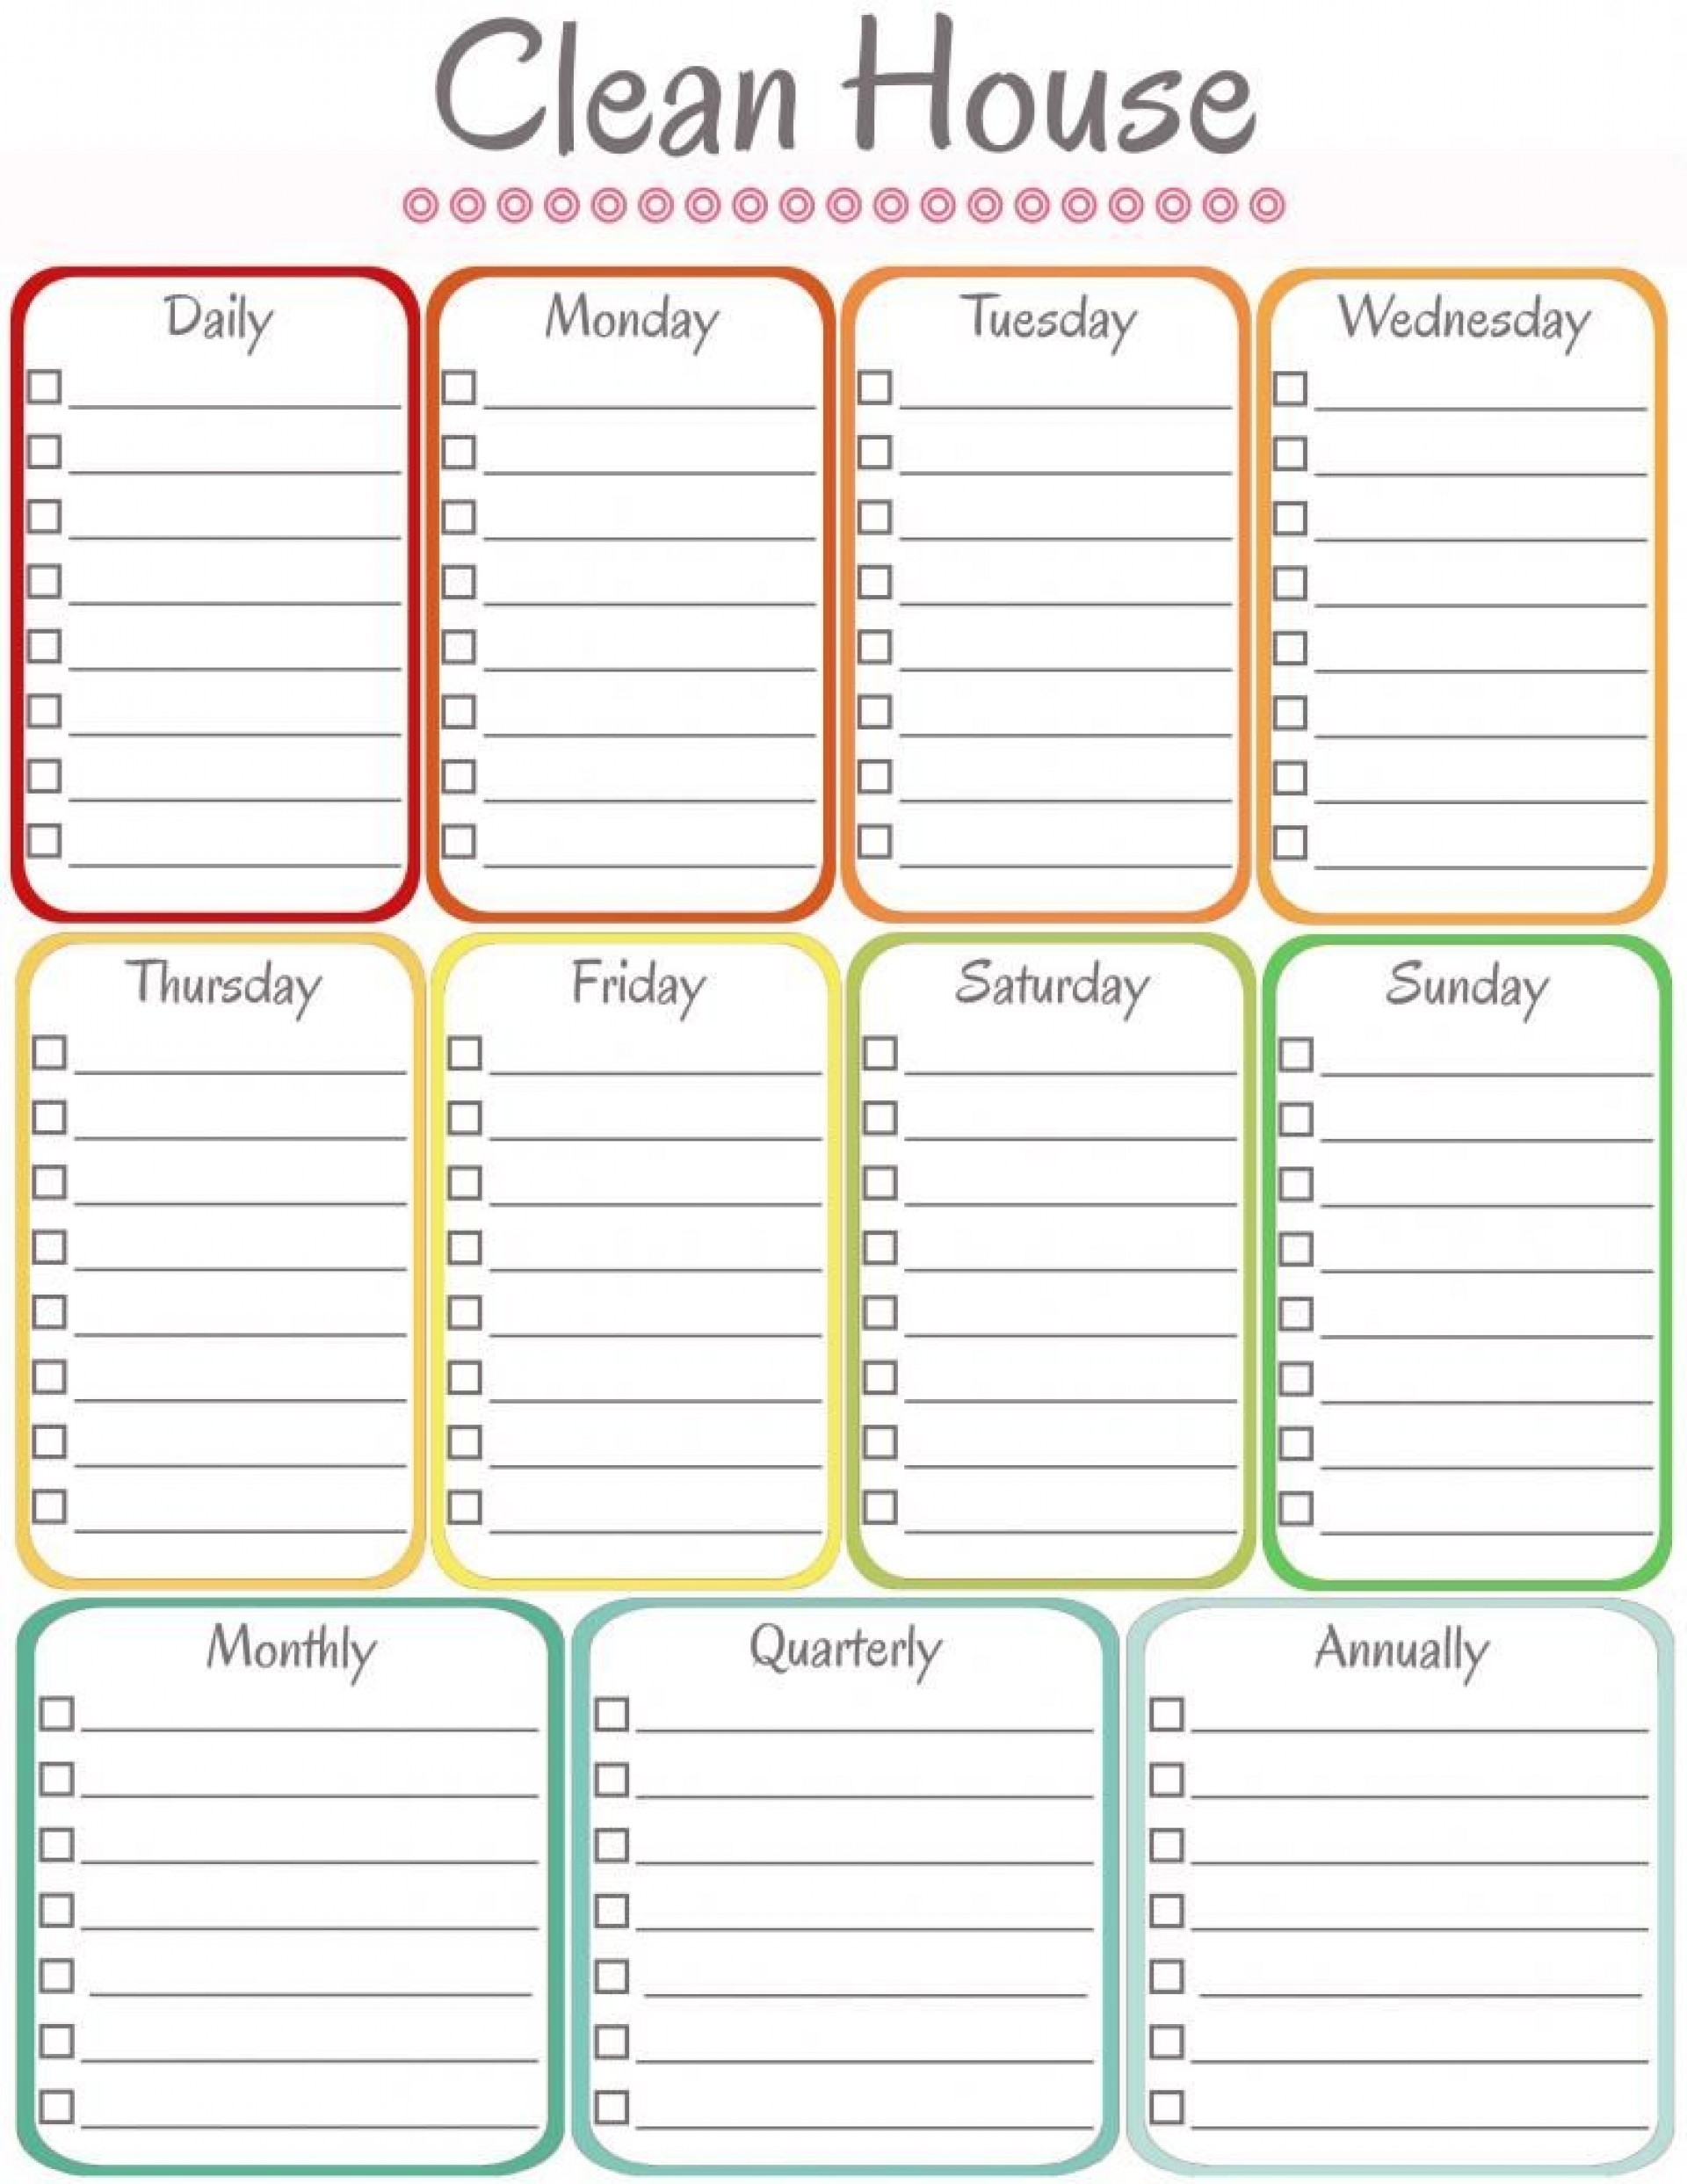 005 Template Ideas Weekly Cleaning Schedule Archaicawful-Clean Template Monday To Firday